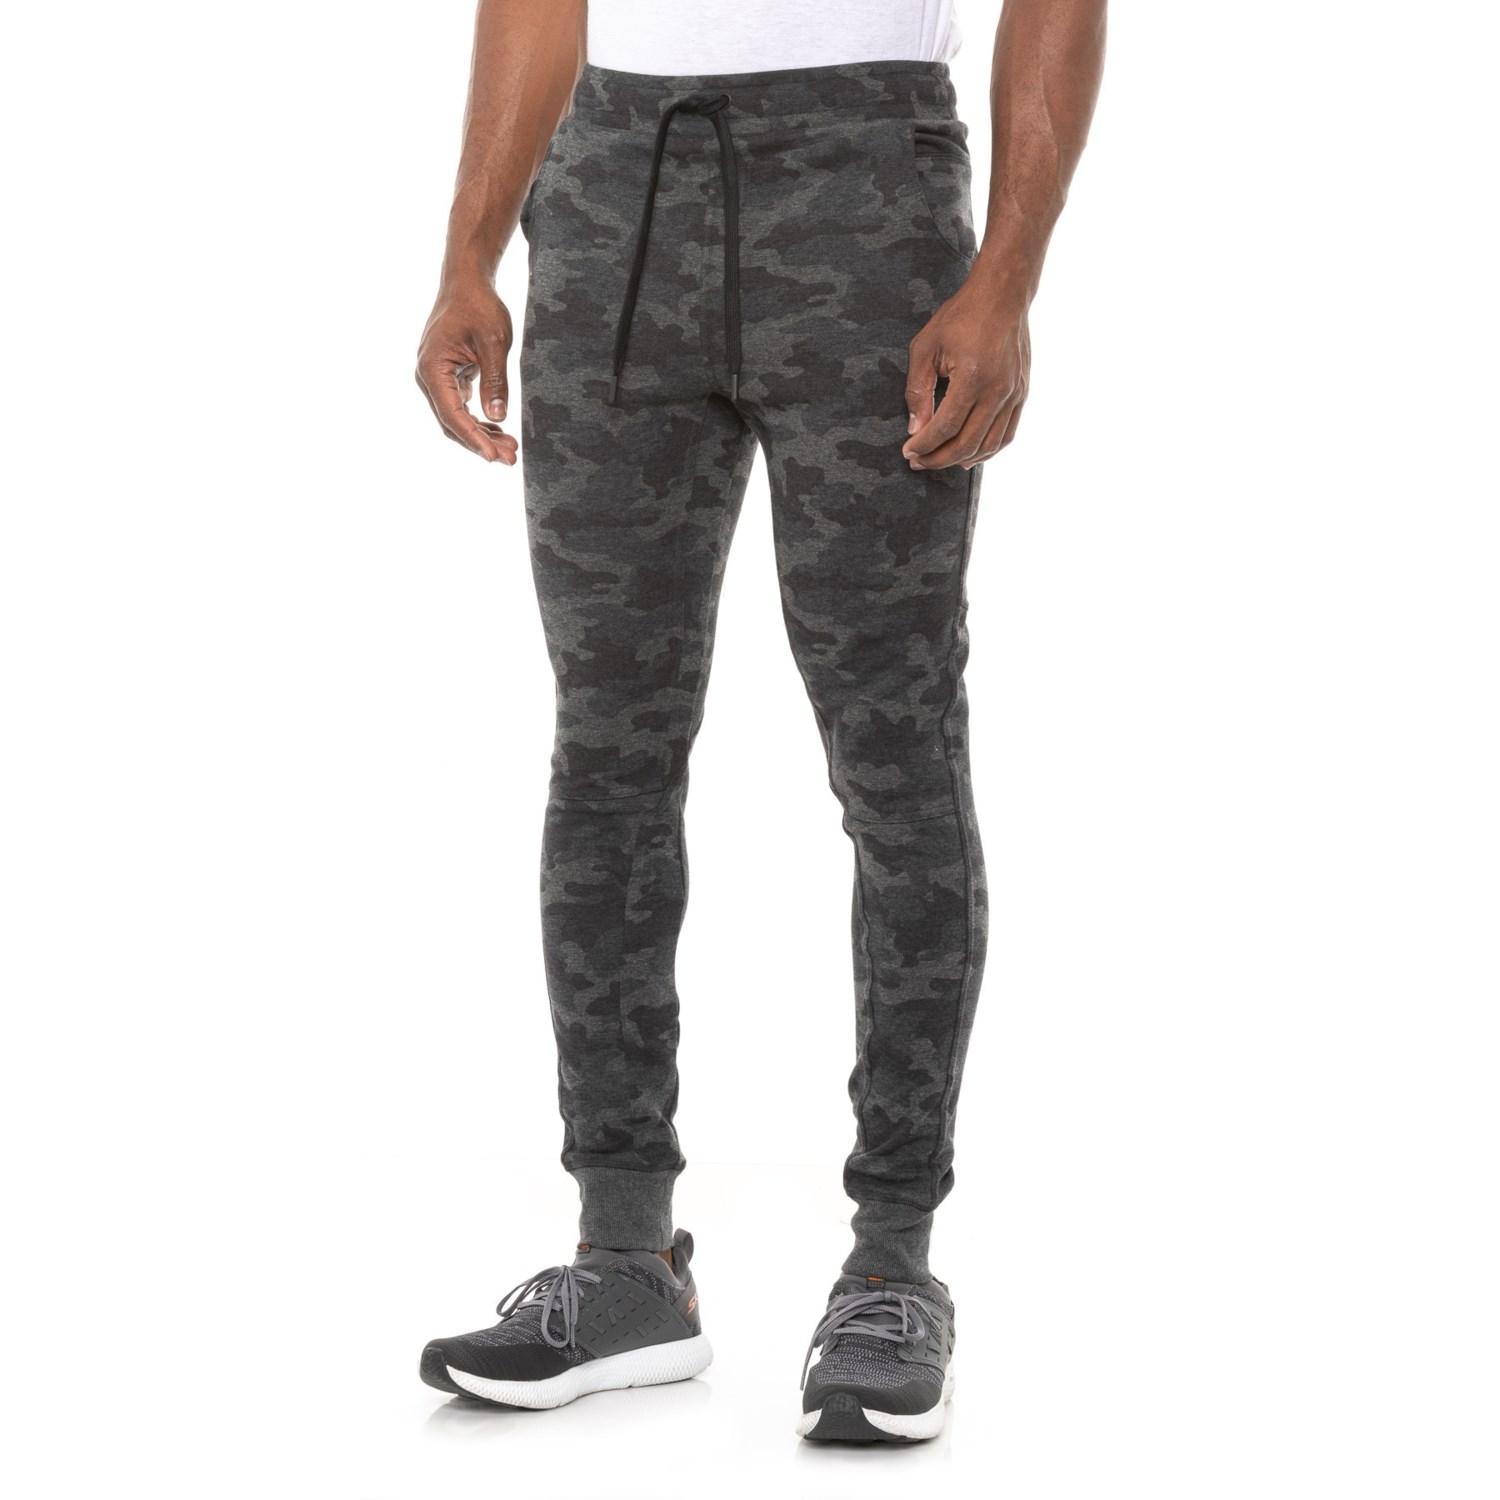 Kyodan Double Knit Joggers (For Men) - Save 28%